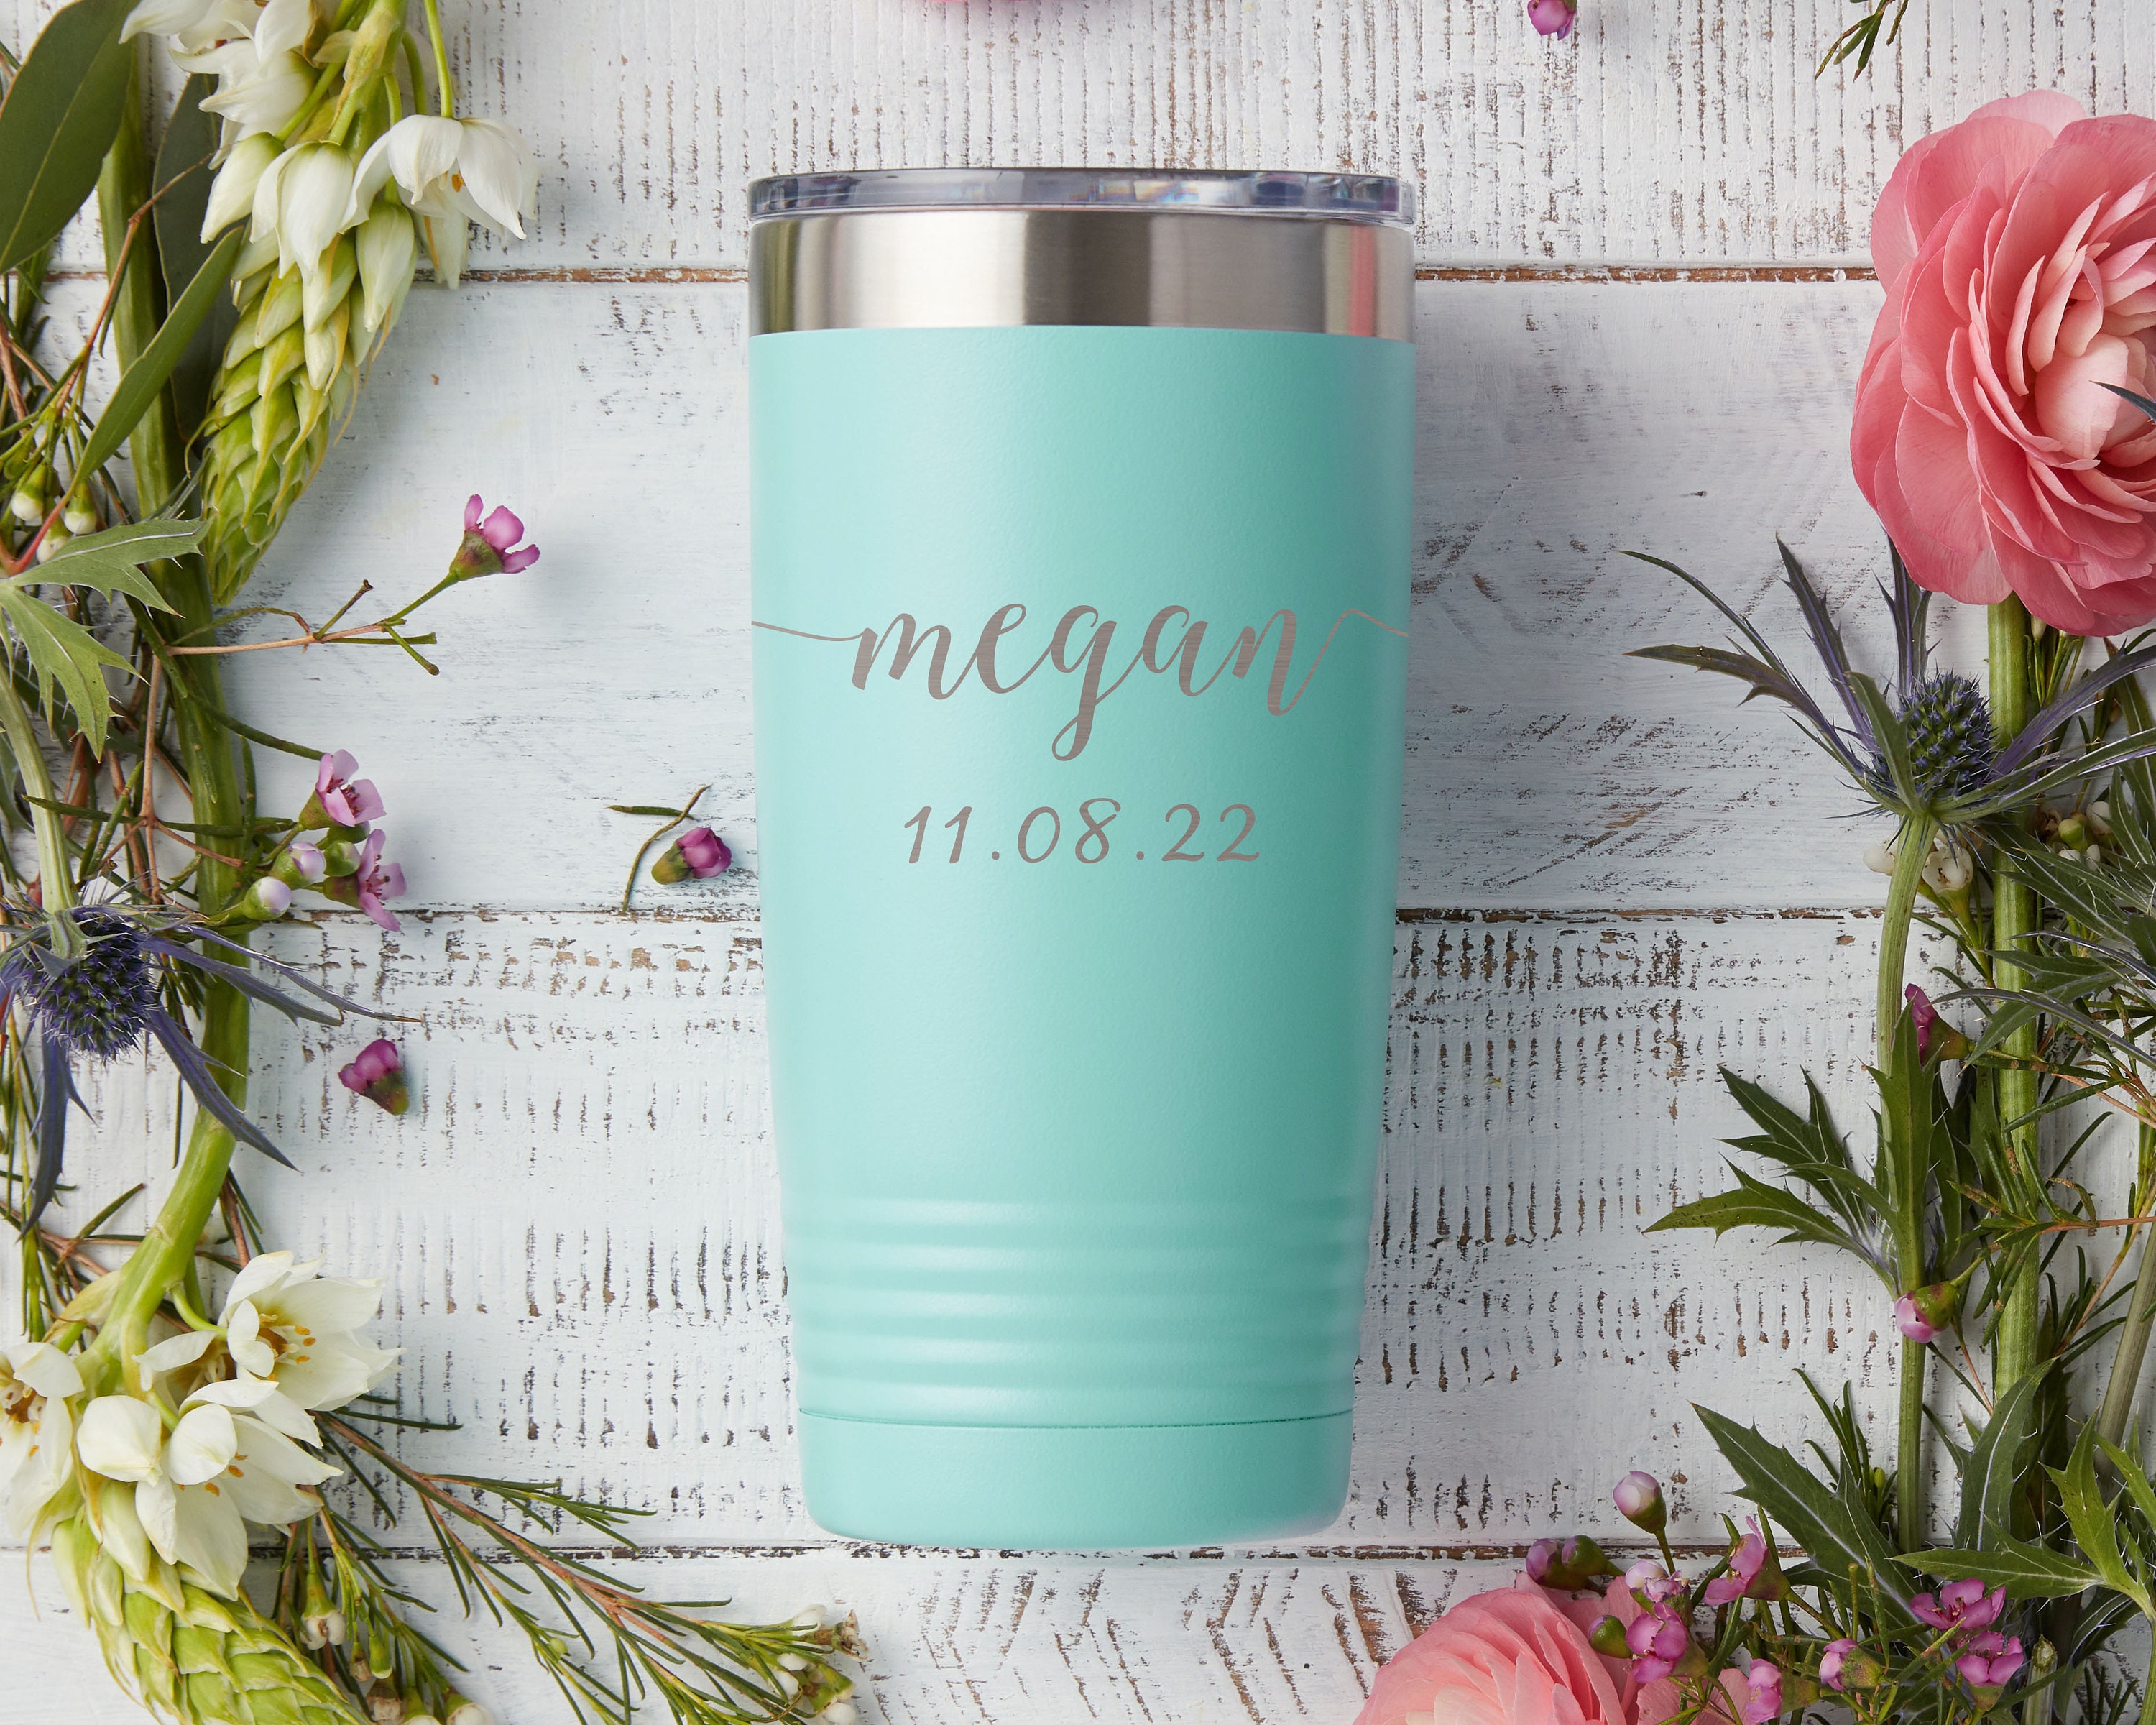 Personalised Stainless Steel Travel Cup, Insulated Drinks Flask, Laser  Engraved Travel Mug, Reusable Coffee, Tea Cup, Bridesmaid Gift 